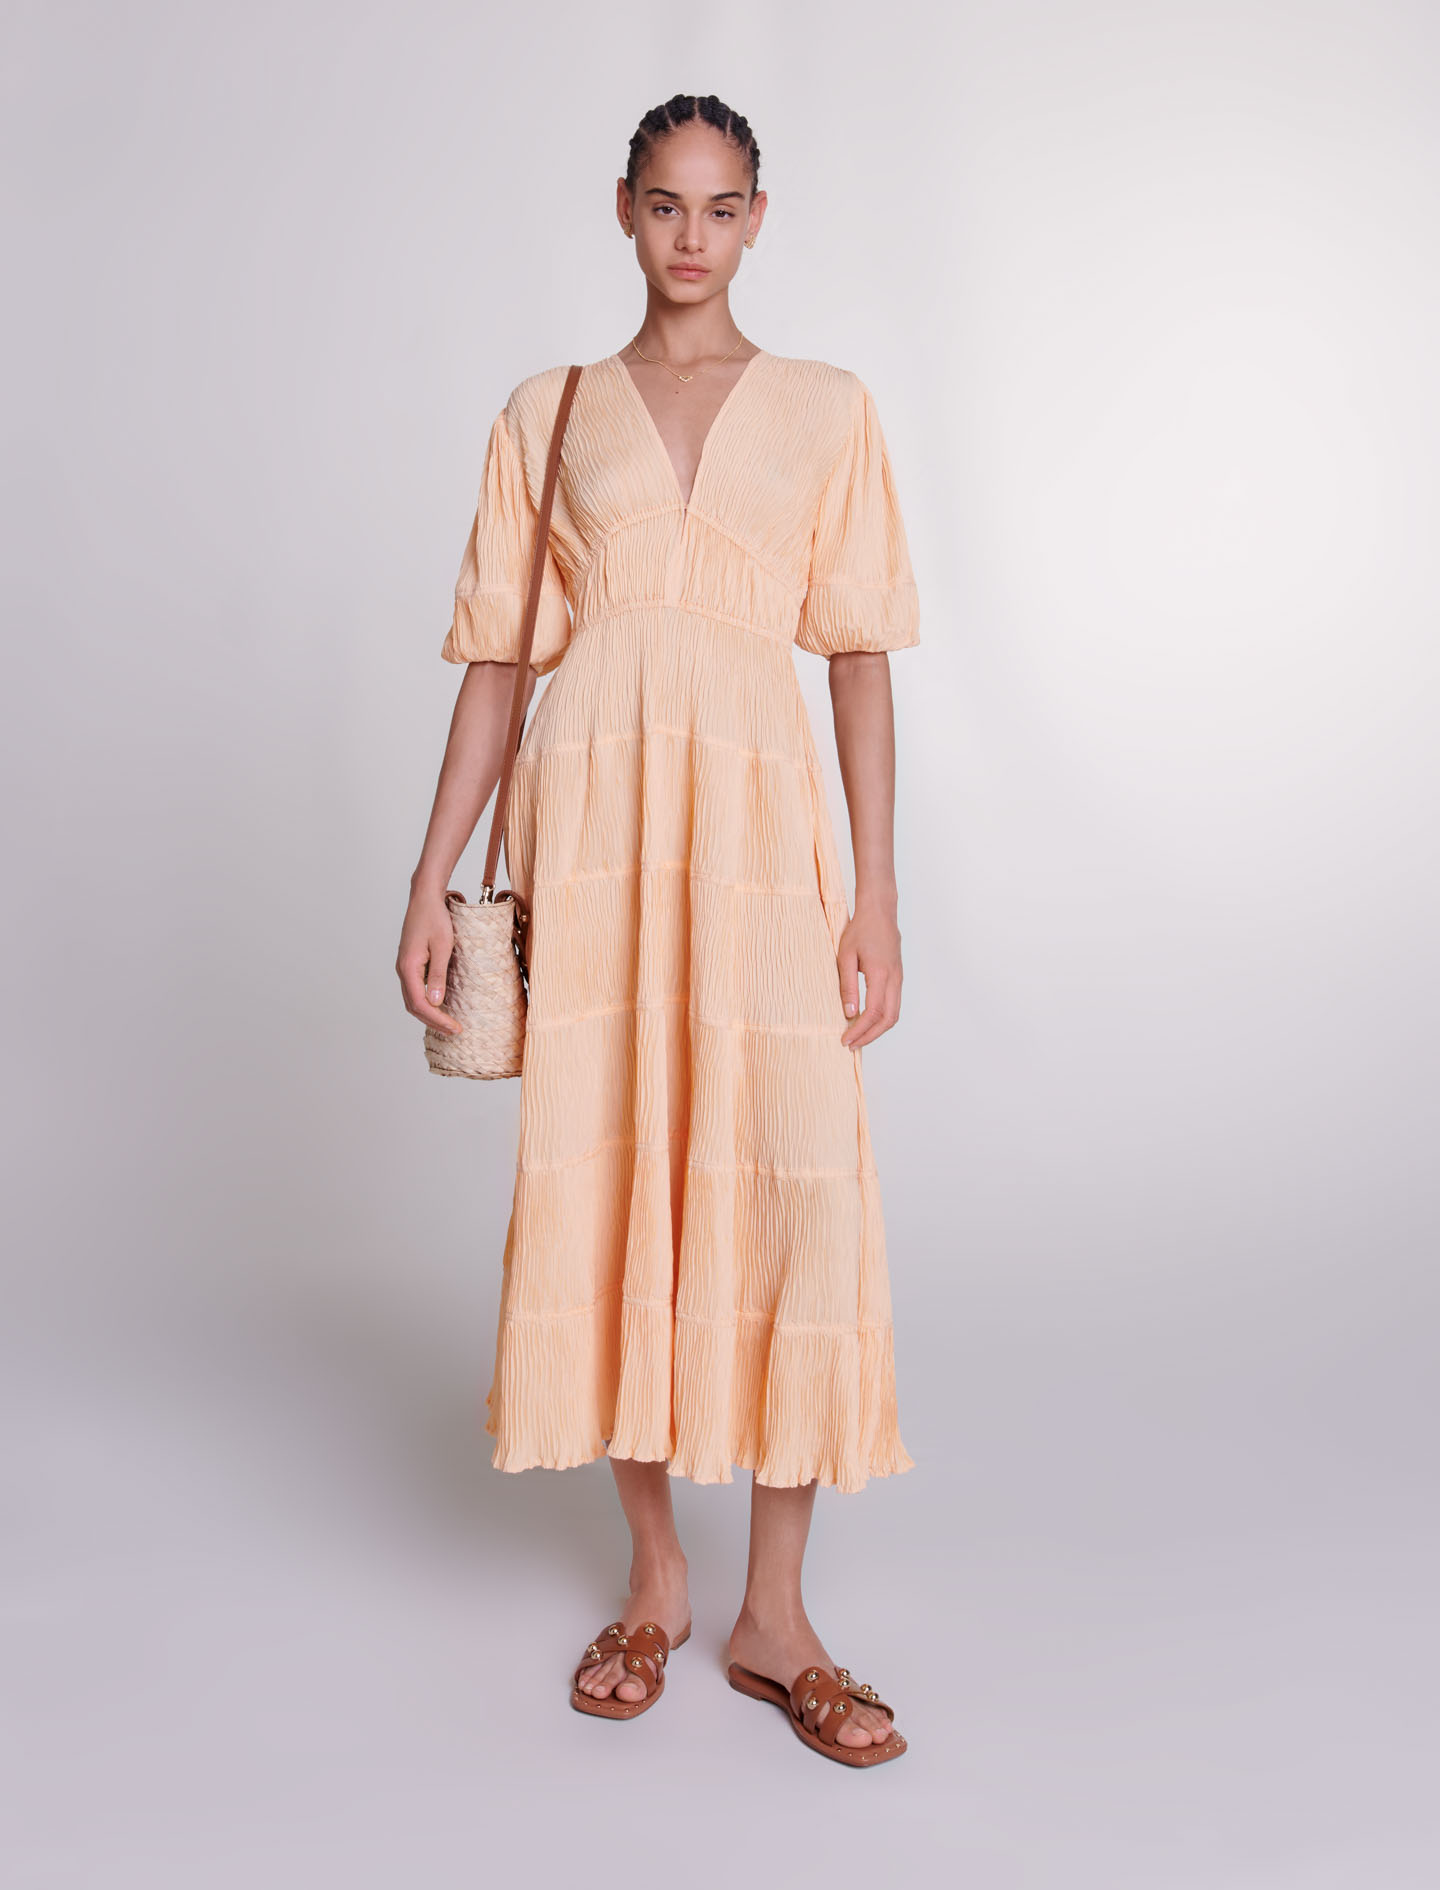 Maje Woman's polyester Buttons: Pleated maxi dress for Spring/Summer, in color Pale orange /